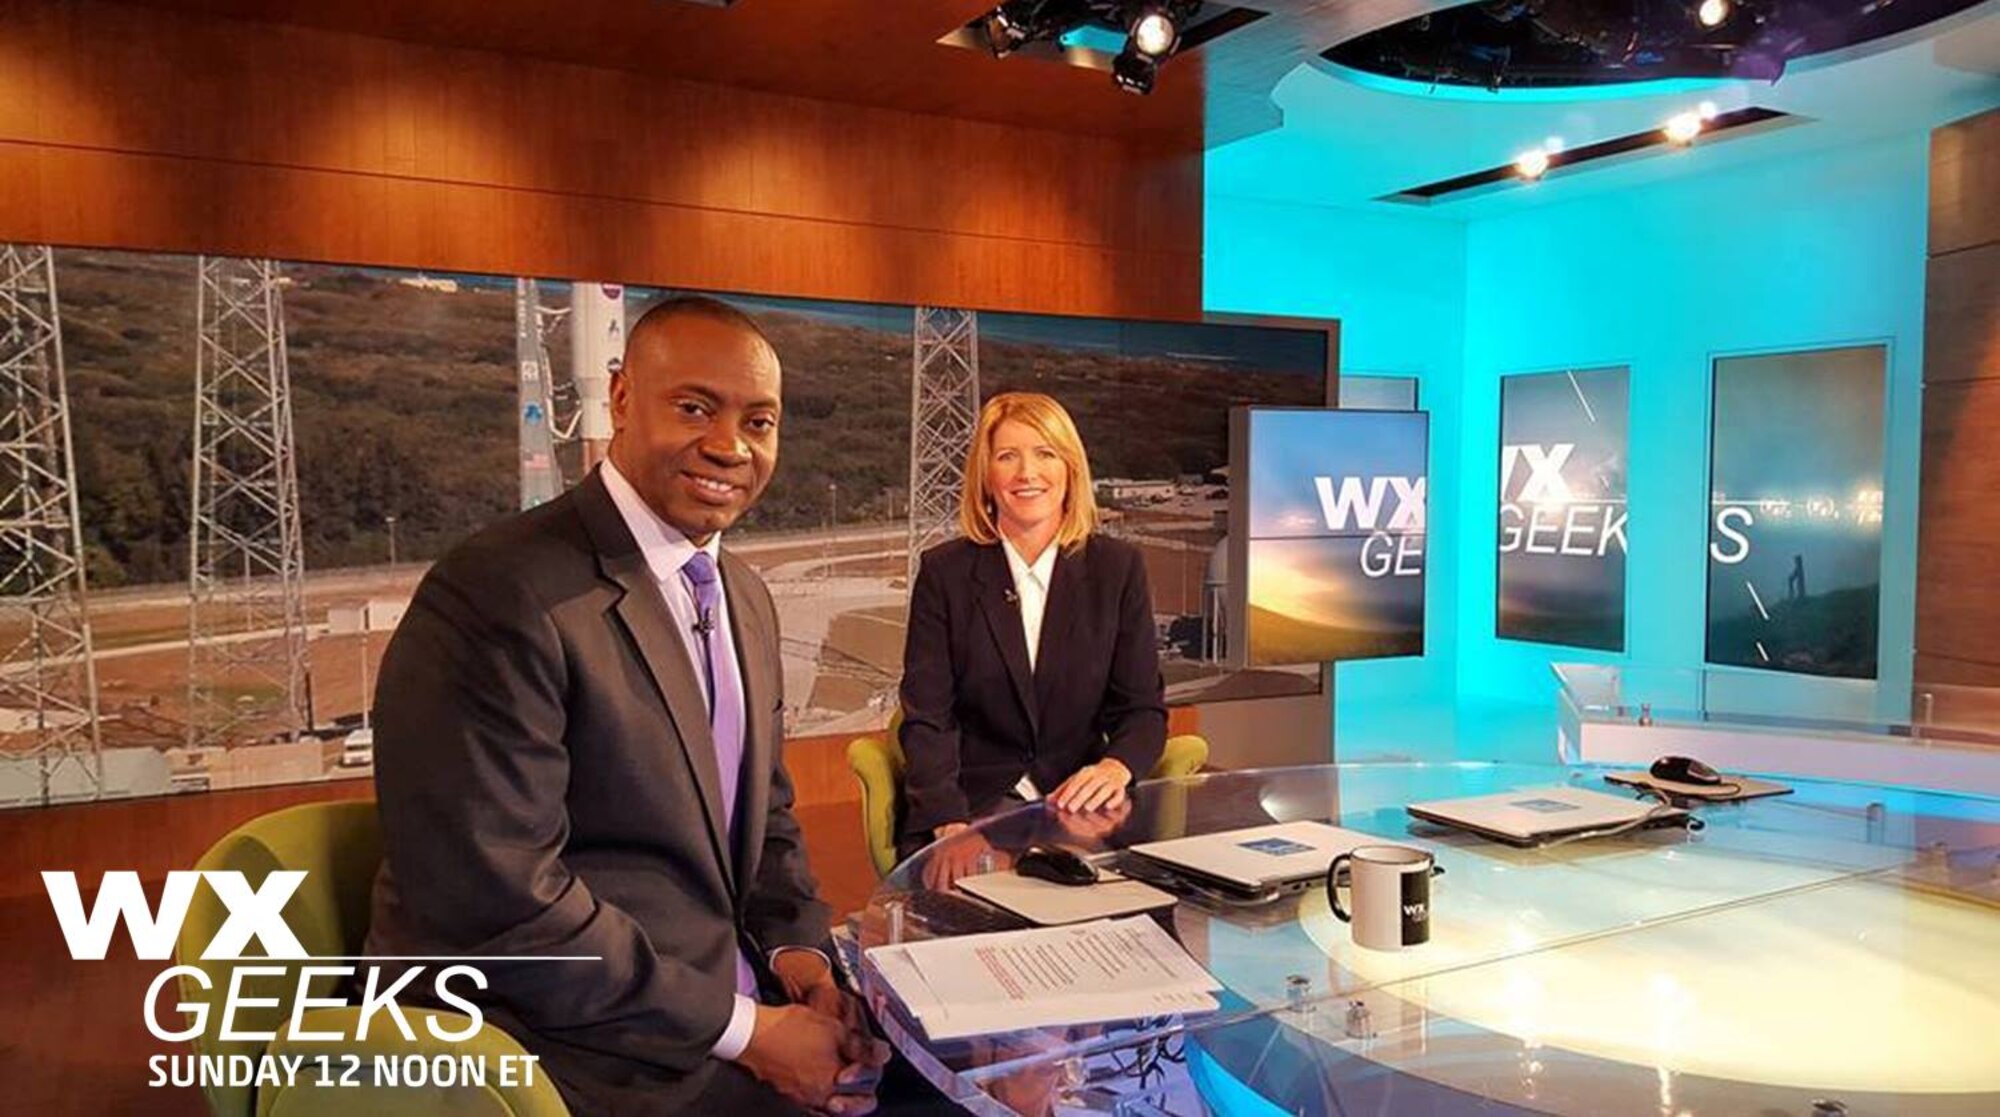 Dr. Marshall Shepherd, a meteorologist for The Weather Channel, and Kathy Winters, a launch weather officer with the 45th Weather Squadron, discusses the unique ways their professional expertise is applied to the mission of the 45th Space Wing Dec. 17, 2015. The dialogue was filmed at the channel's studio in Atlanta, Ga., for a production that aired Jan. 10. The show also featured photos Winter’s co-worker, Tech. Sgt. Matthew Mong, who was named as the show’s “Geek of the Week.” Videos of launches their team works behind the scenes to support from Cape Canaveral Air Force Station, Fla. were aired throughout the script. (Courtesy photo)